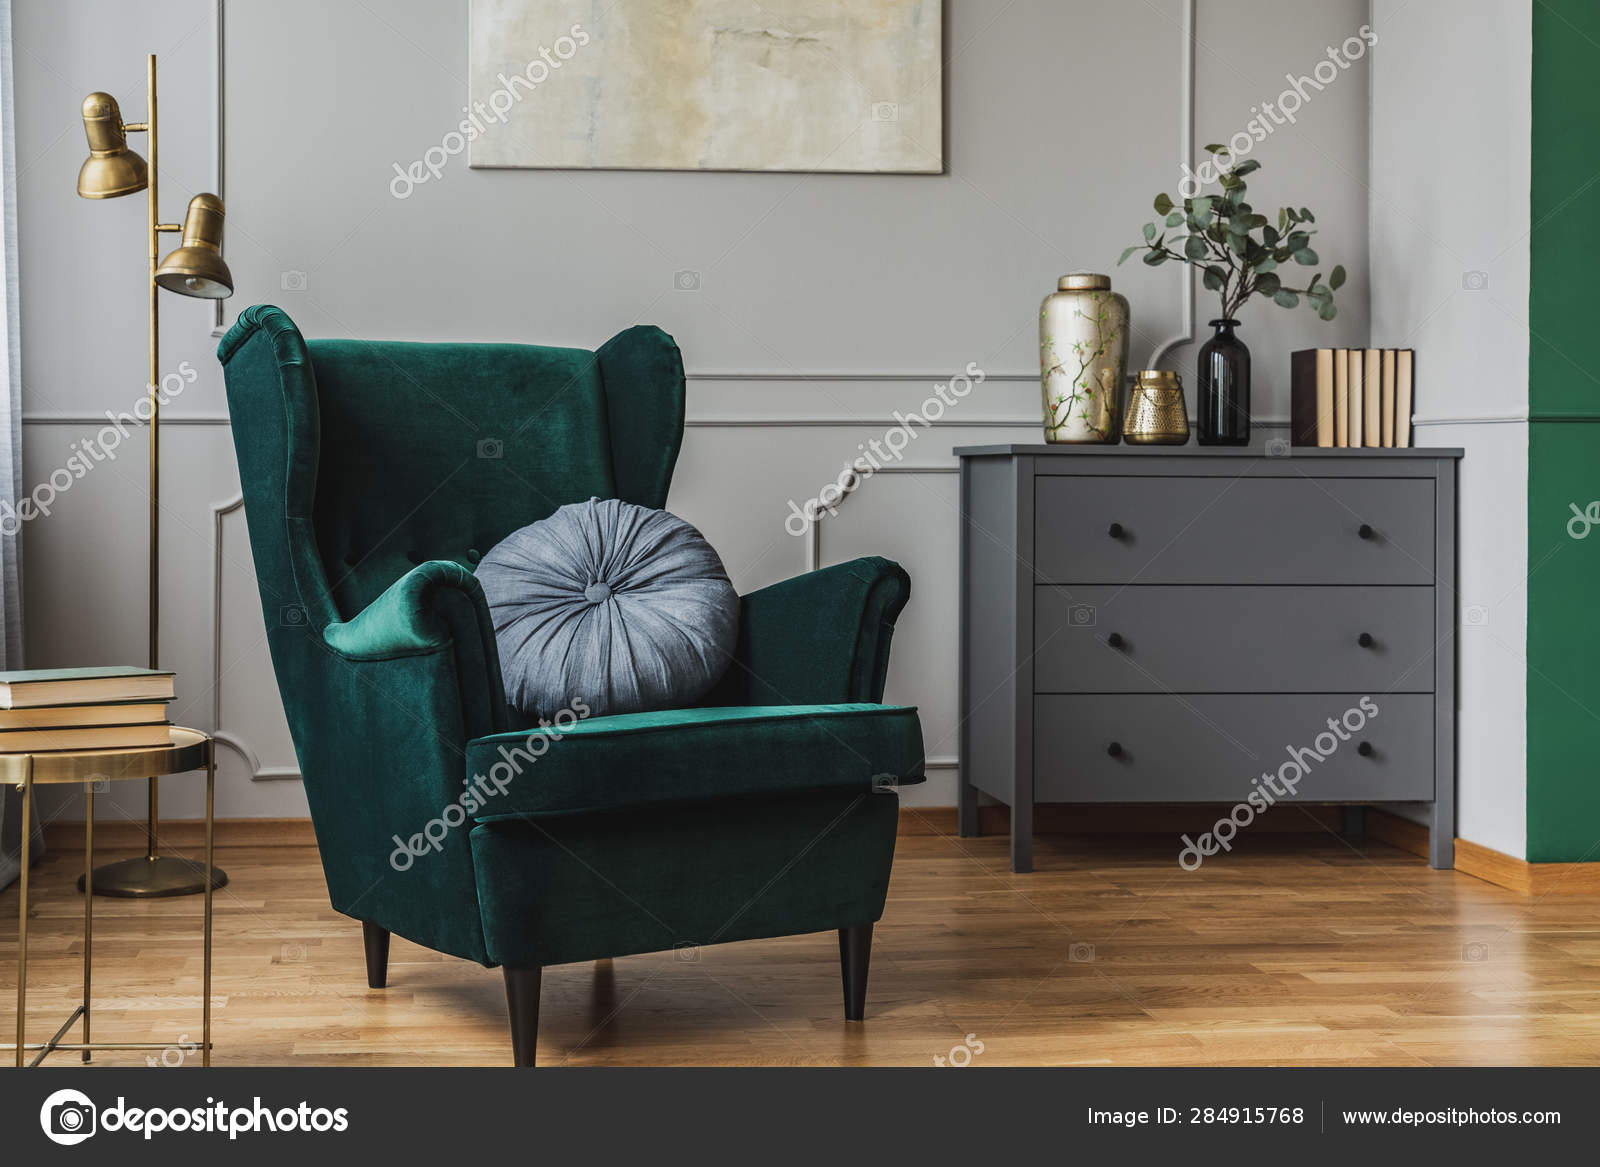 emerald green armchair with pillow next to grey wooden commode in dark  living room interior 284915768